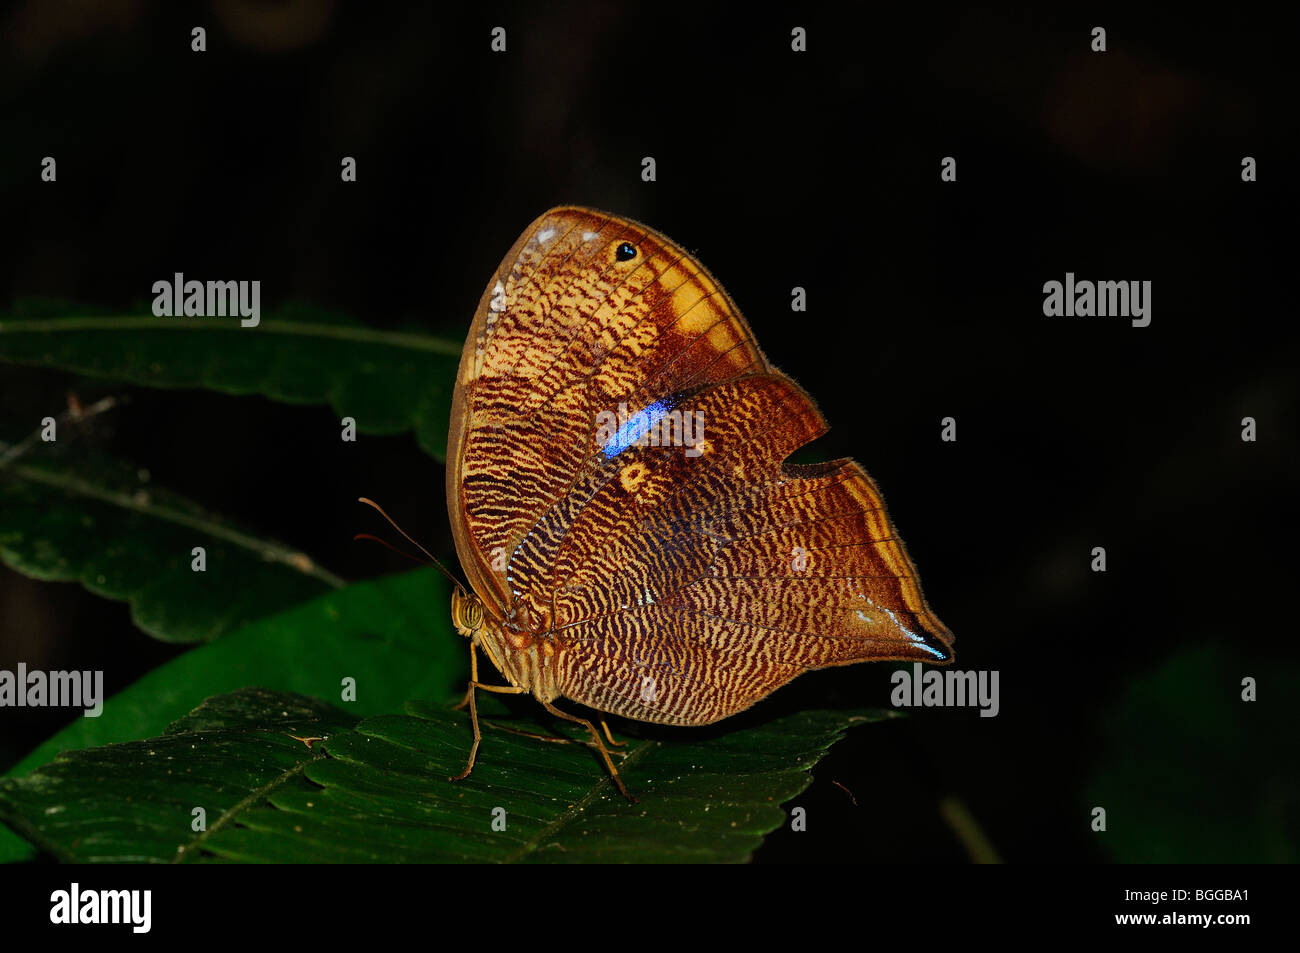 Actorion Owlet Butterfly (Bia actorion) resting on leaf, Alta Floresta, Brazil. Stock Photo